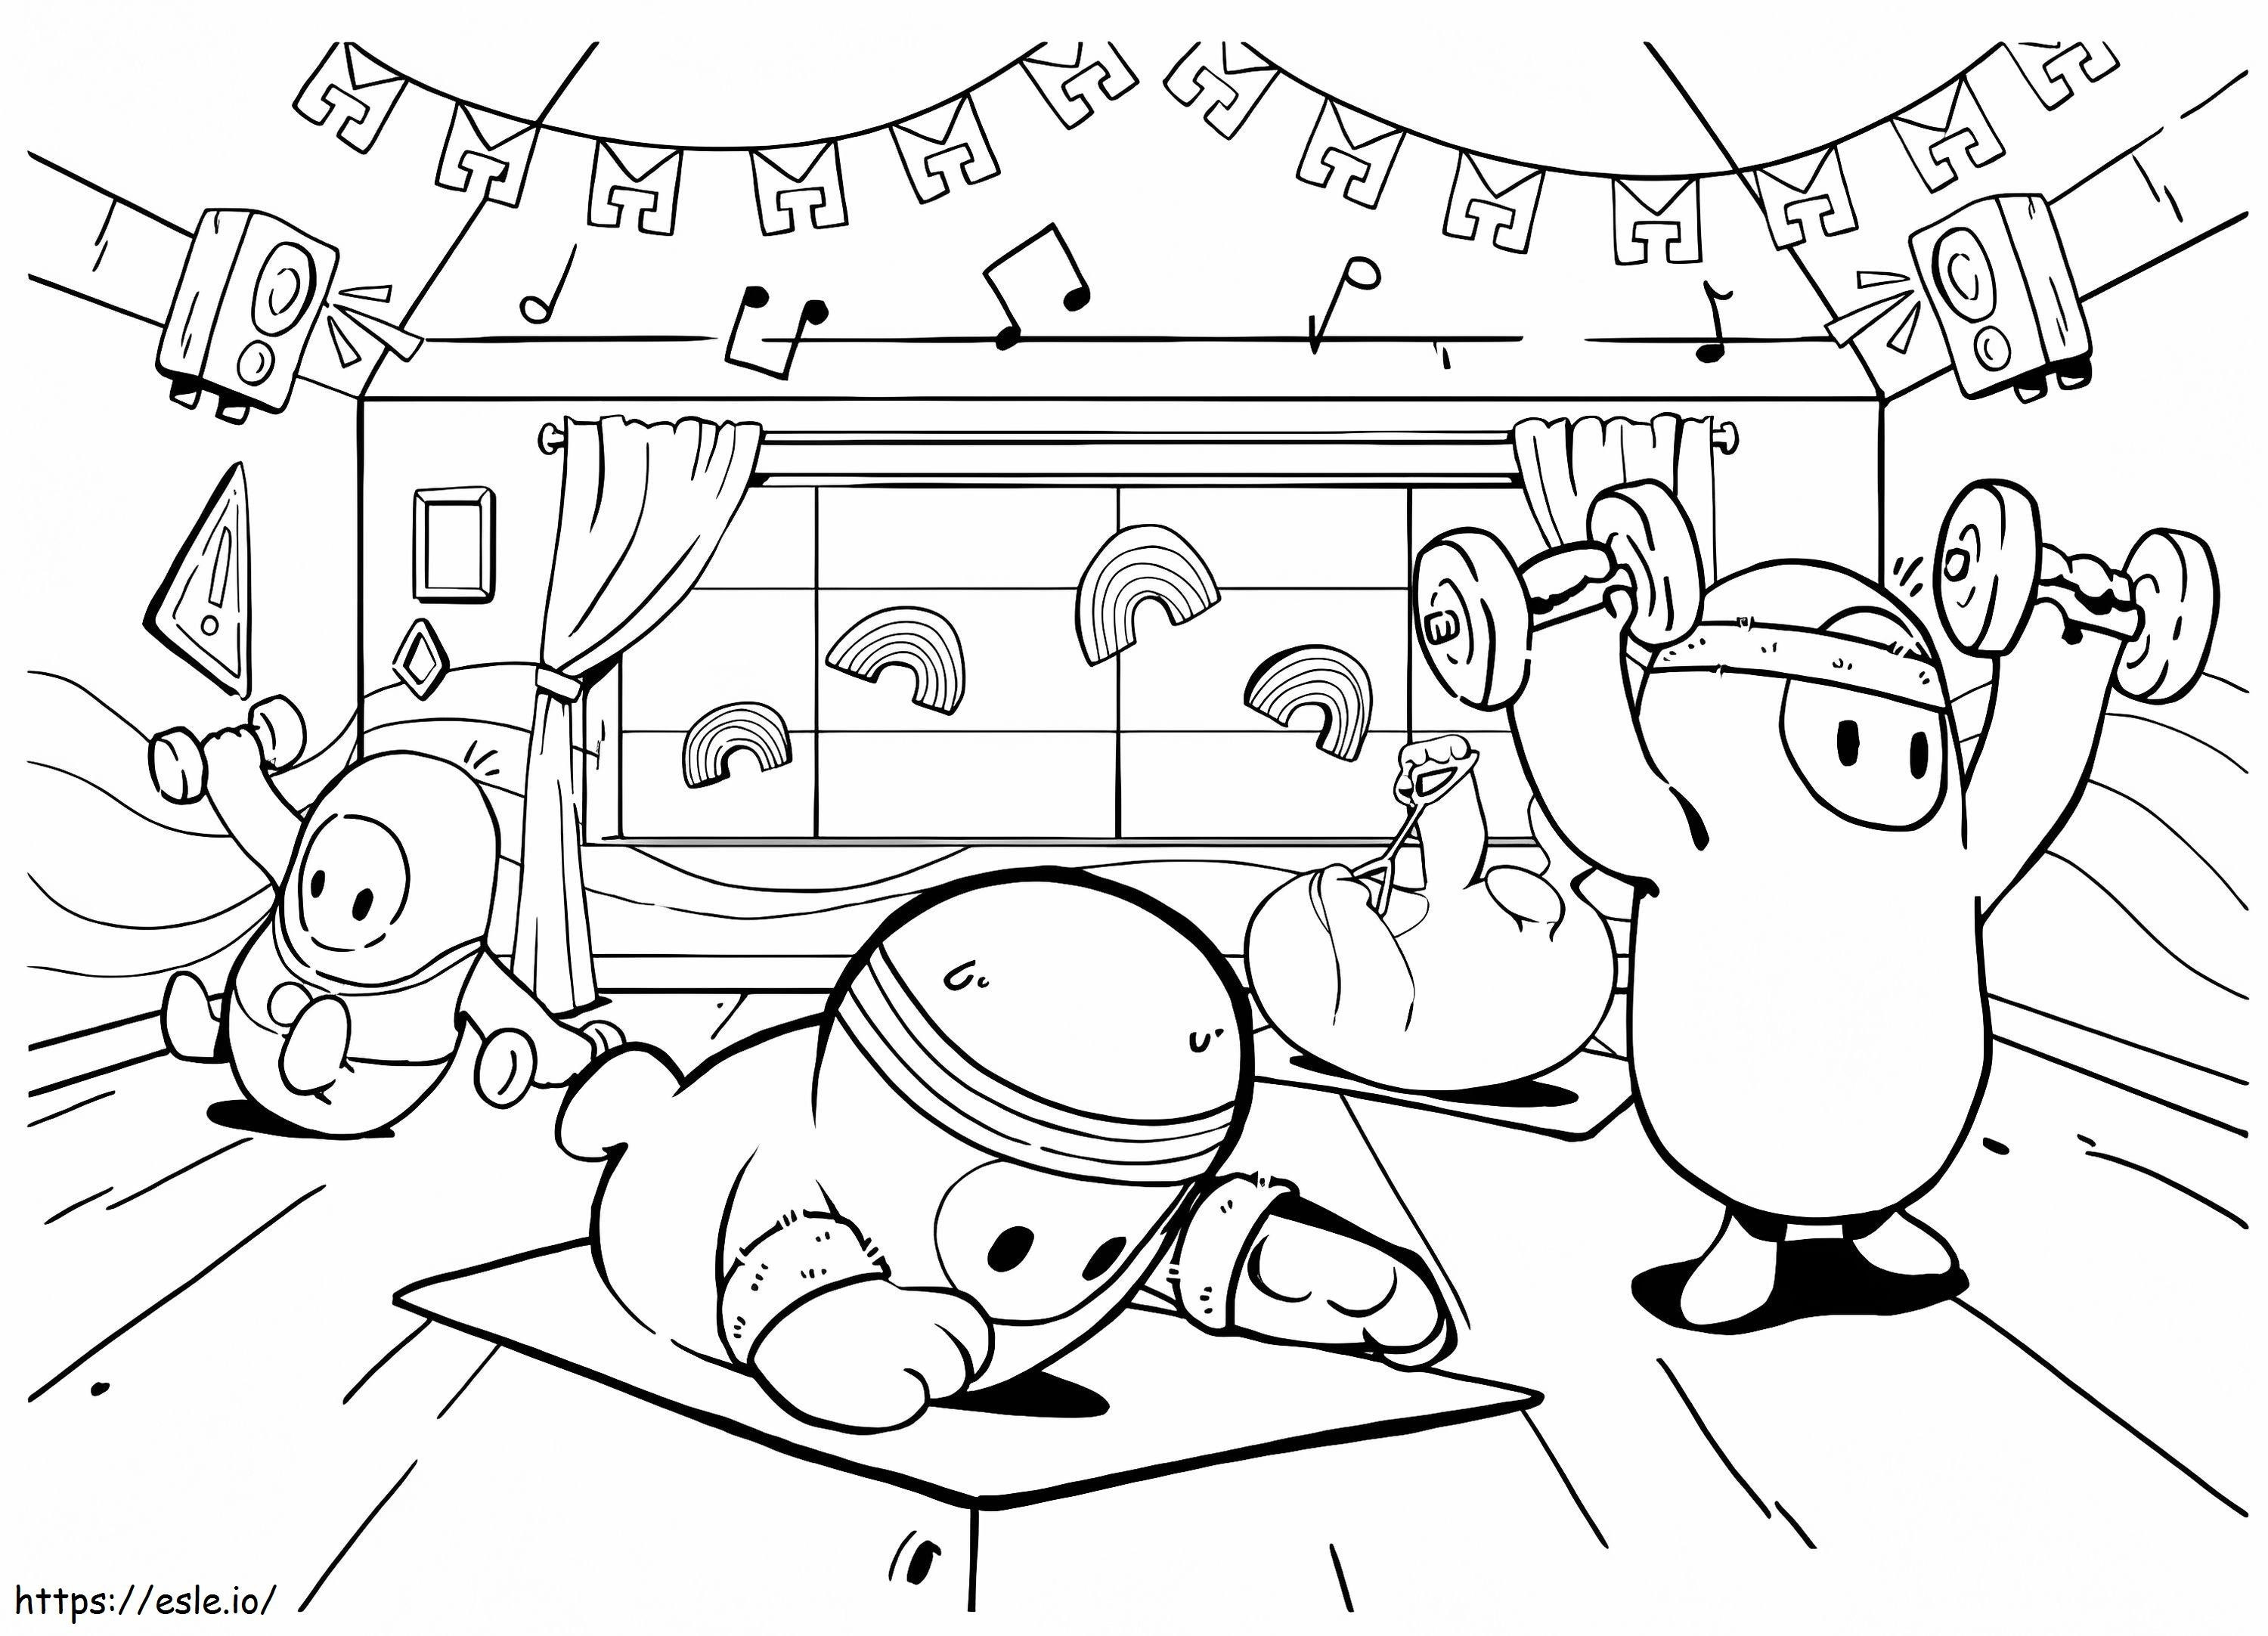 Characters In Fall Guys coloring page